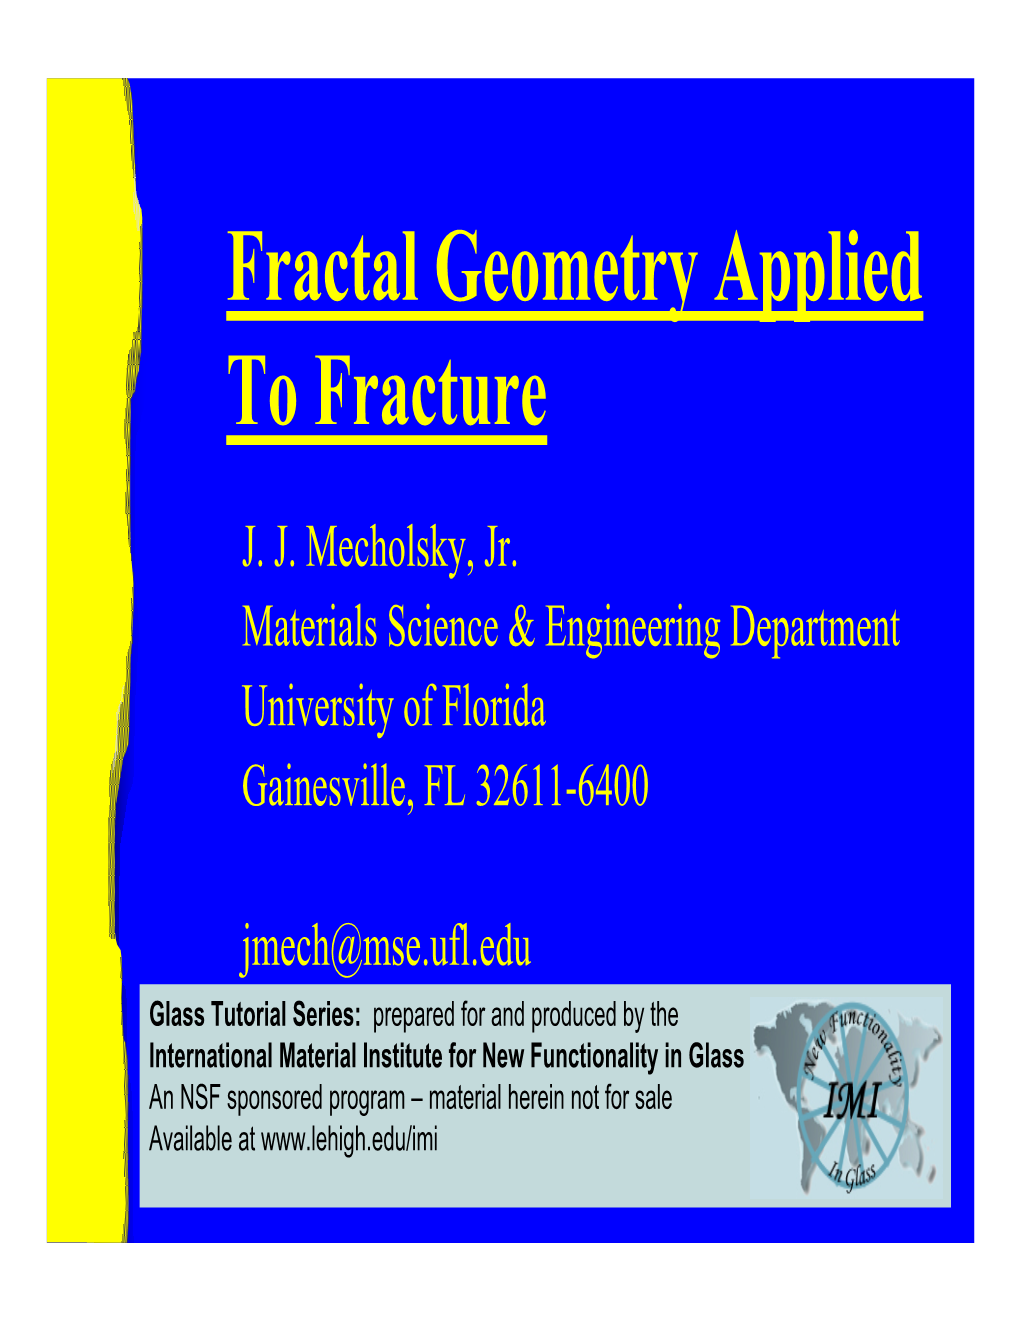 Fractal Geometry Applied to Fracture